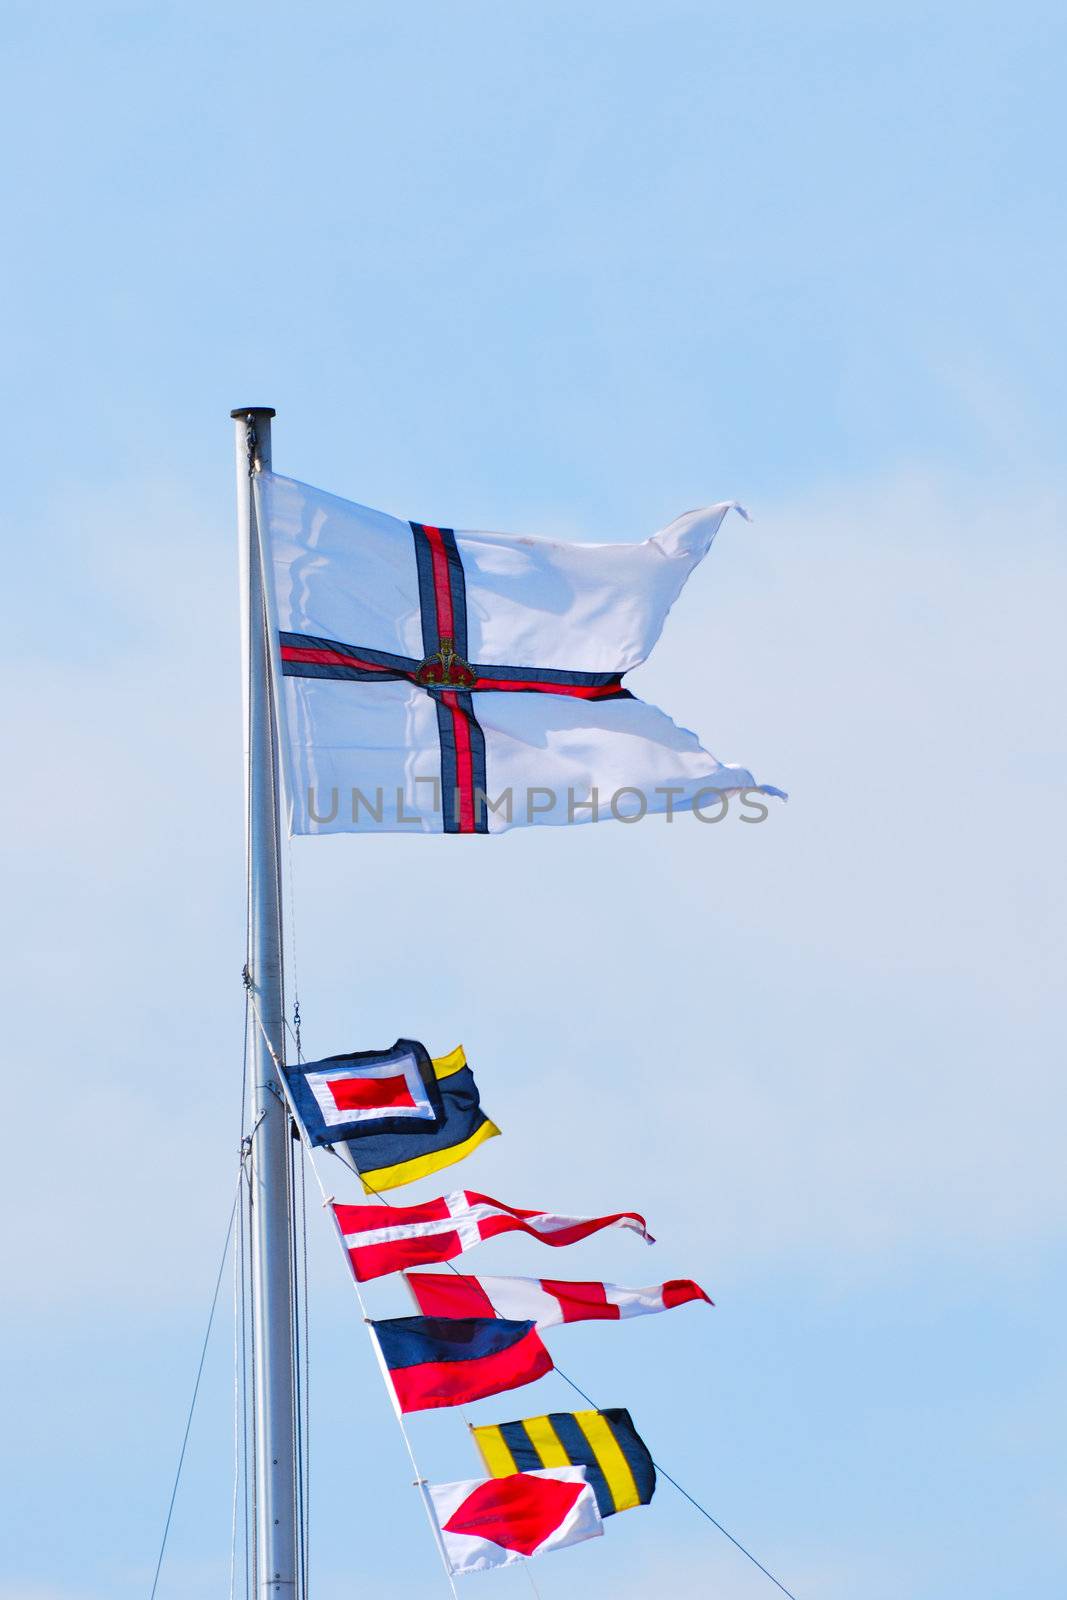 Naval Flags by pauws99